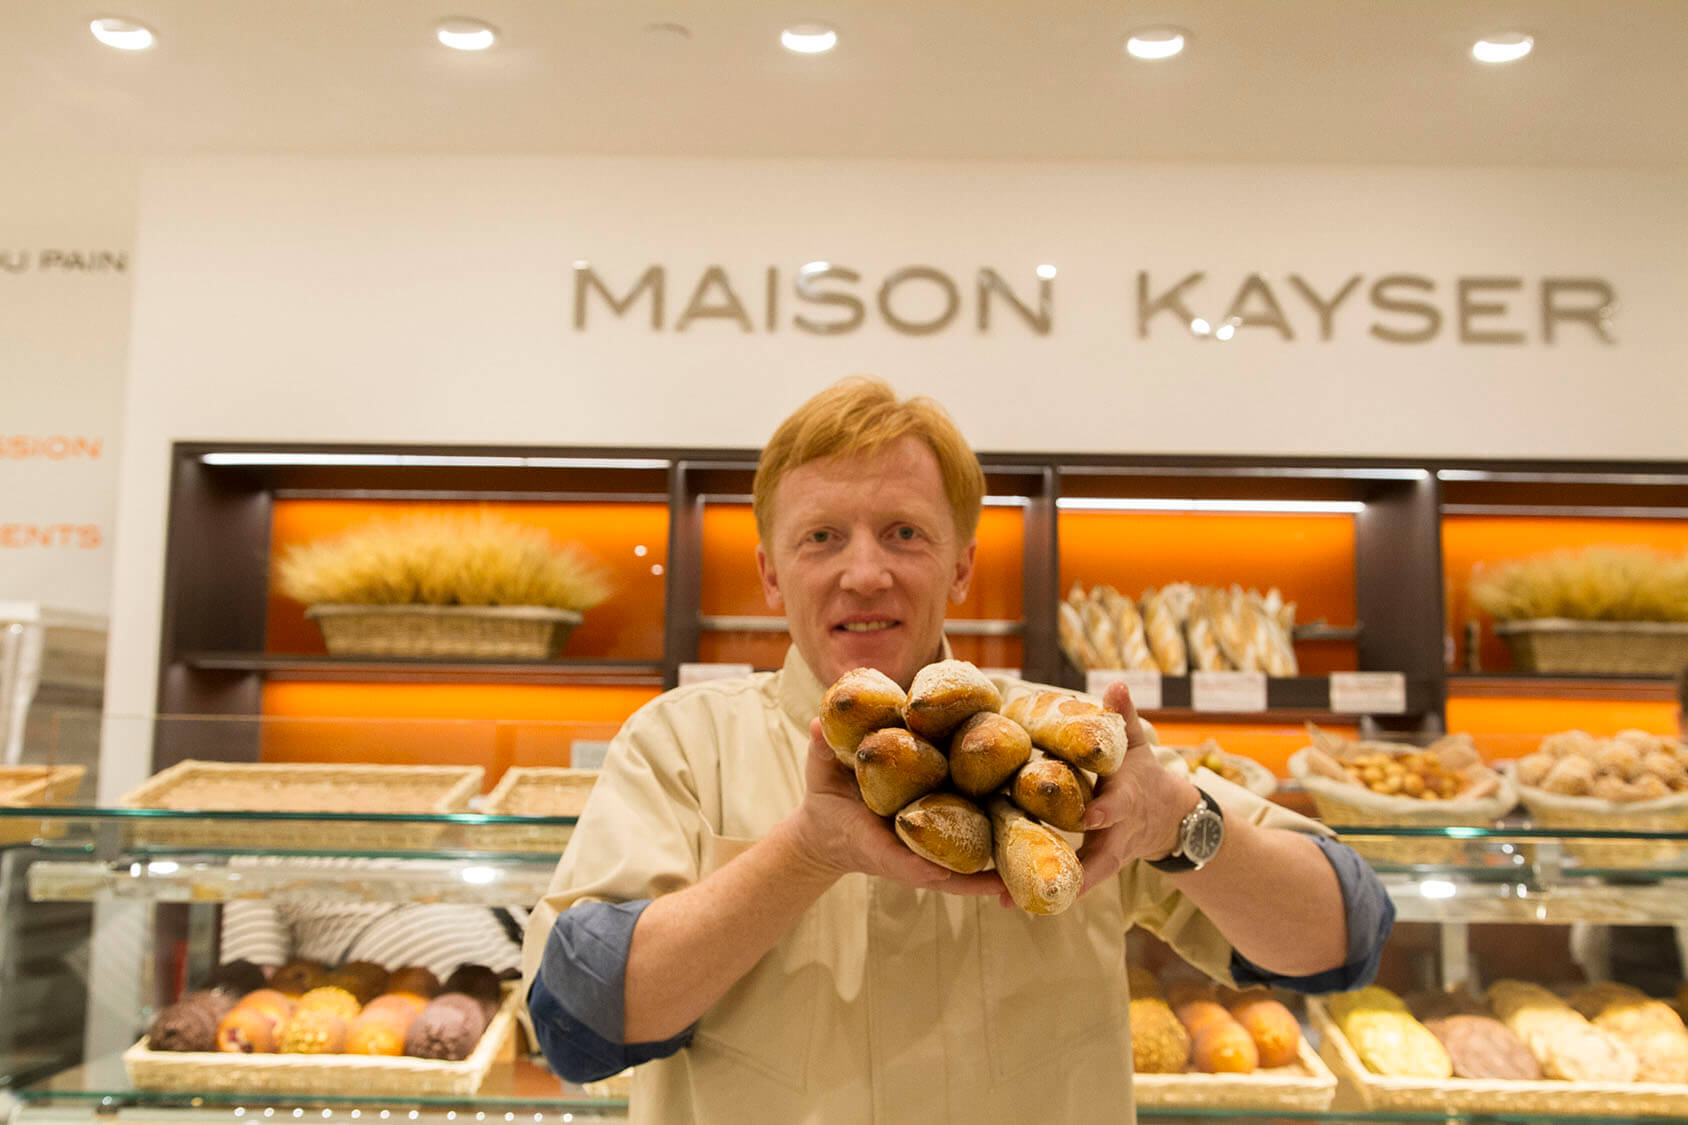 Eric Kayser with baguettes!